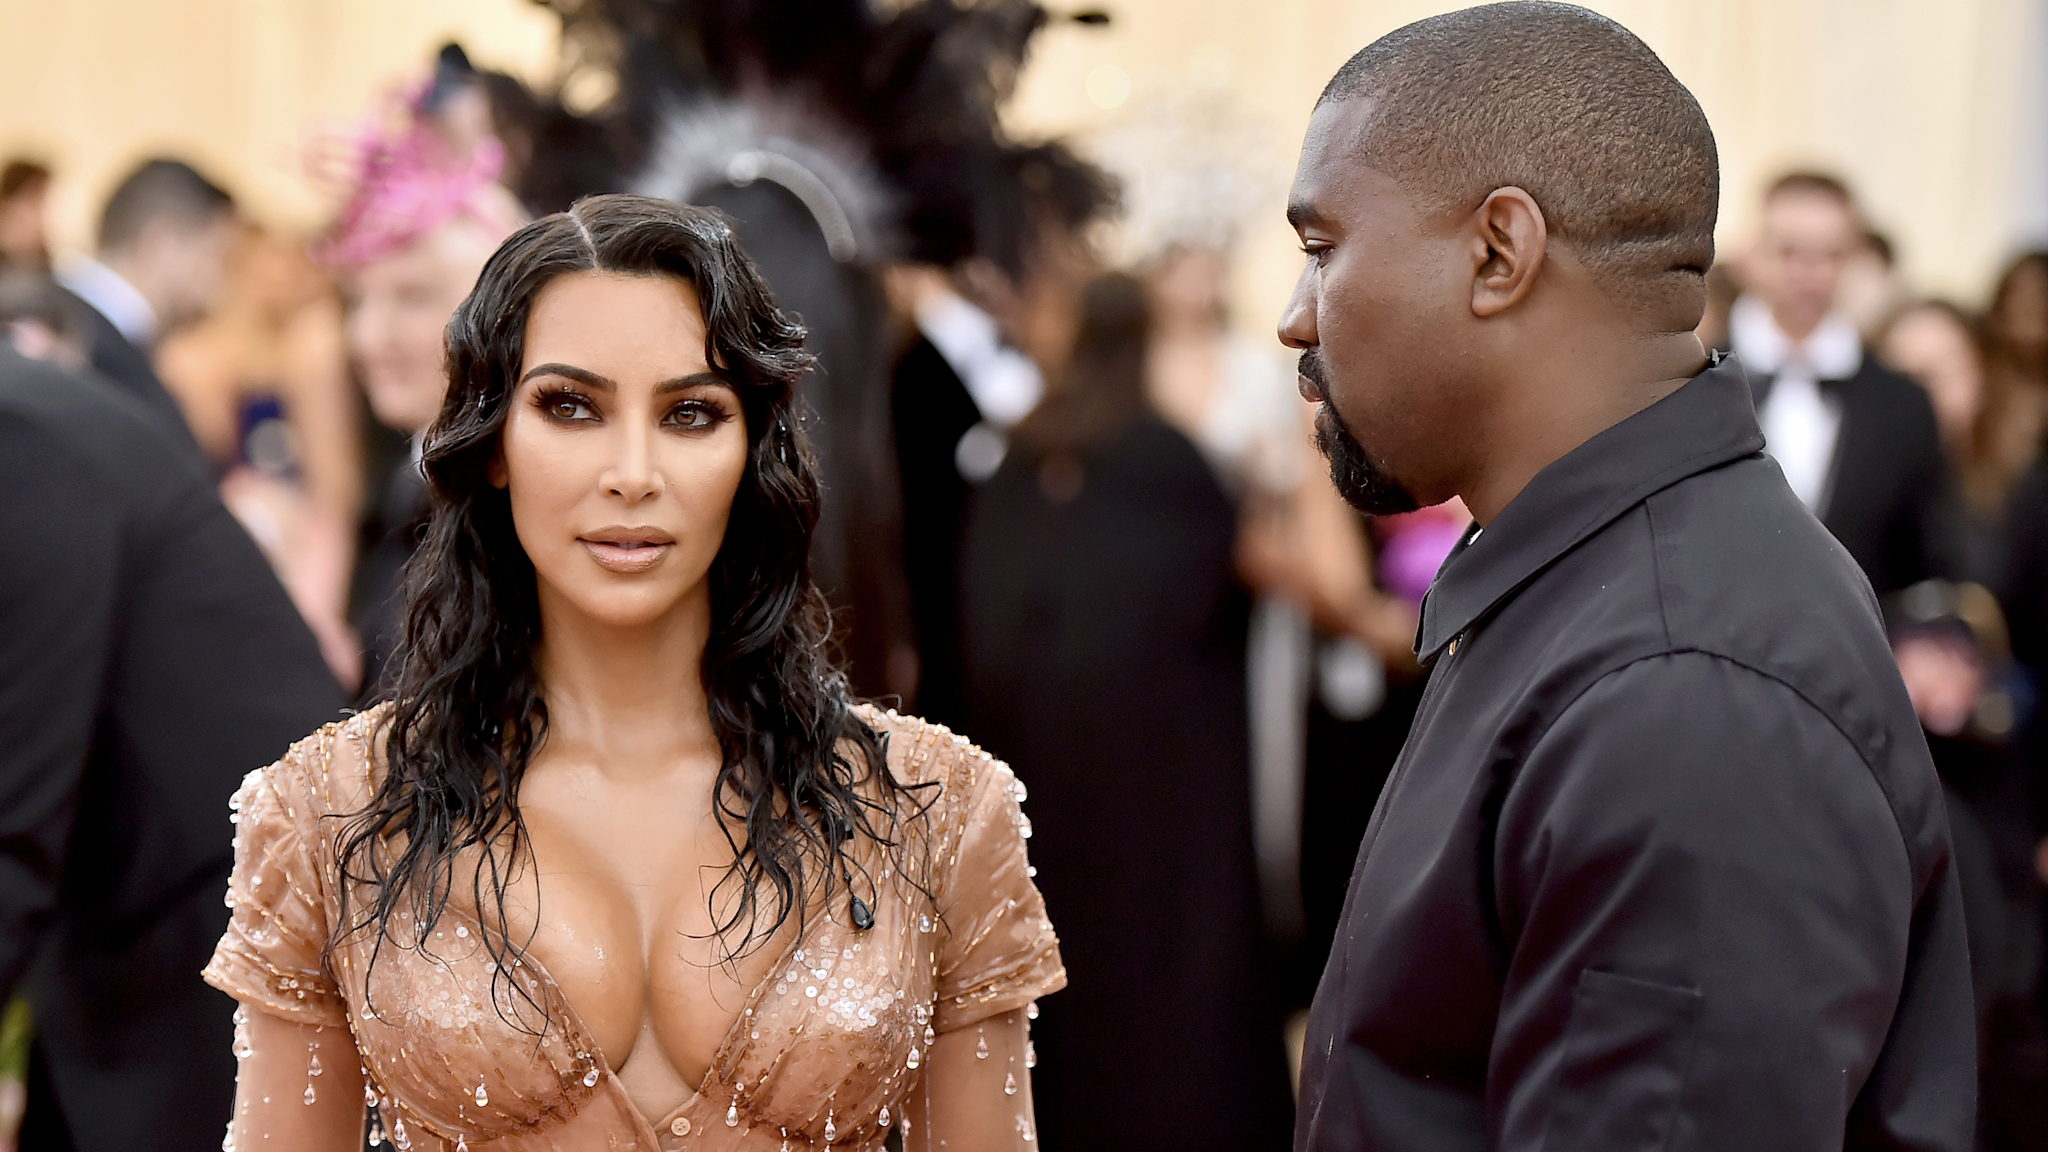 NEW YORK, NEW YORK - MAY 06: Kim Kardashian West and Kanye West attend The 2019 Met Gala Celebrating Camp: Notes on Fashion at Metropolitan Museum of Art on May 06, 2019 in New York City.